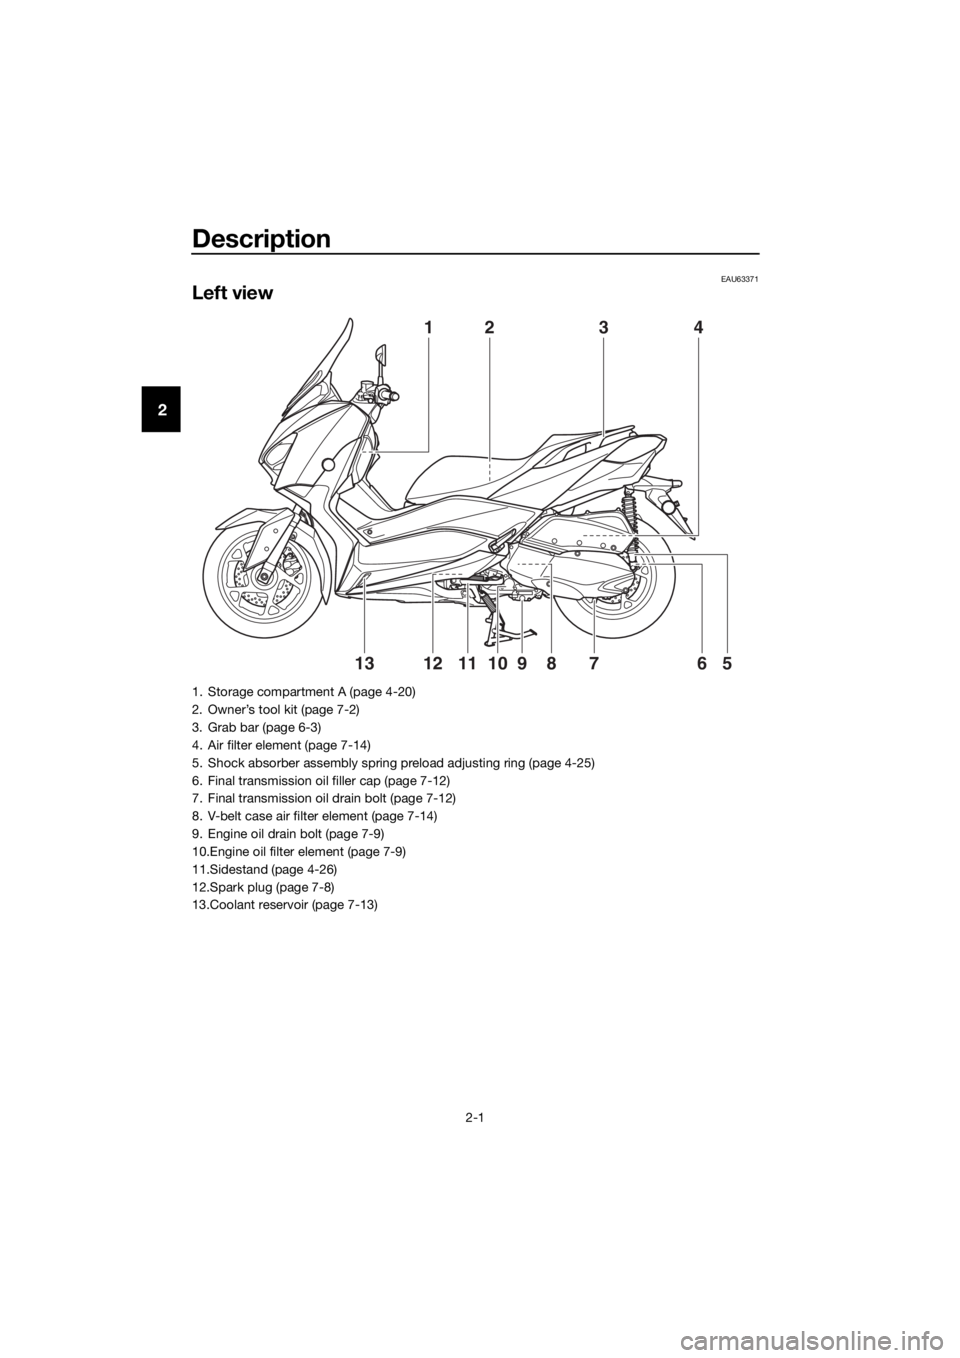 YAMAHA XMAX 300 2018  Owners Manual Description
2-1
2
EAU63371
Left view
41
5610812791113
23
1. Storage compartment A (page 4-20)
2. Owner’s tool kit (page 7-2)
3. Grab bar (page 6-3)
4. Air filter element (page 7-14)
5. Shock absorbe